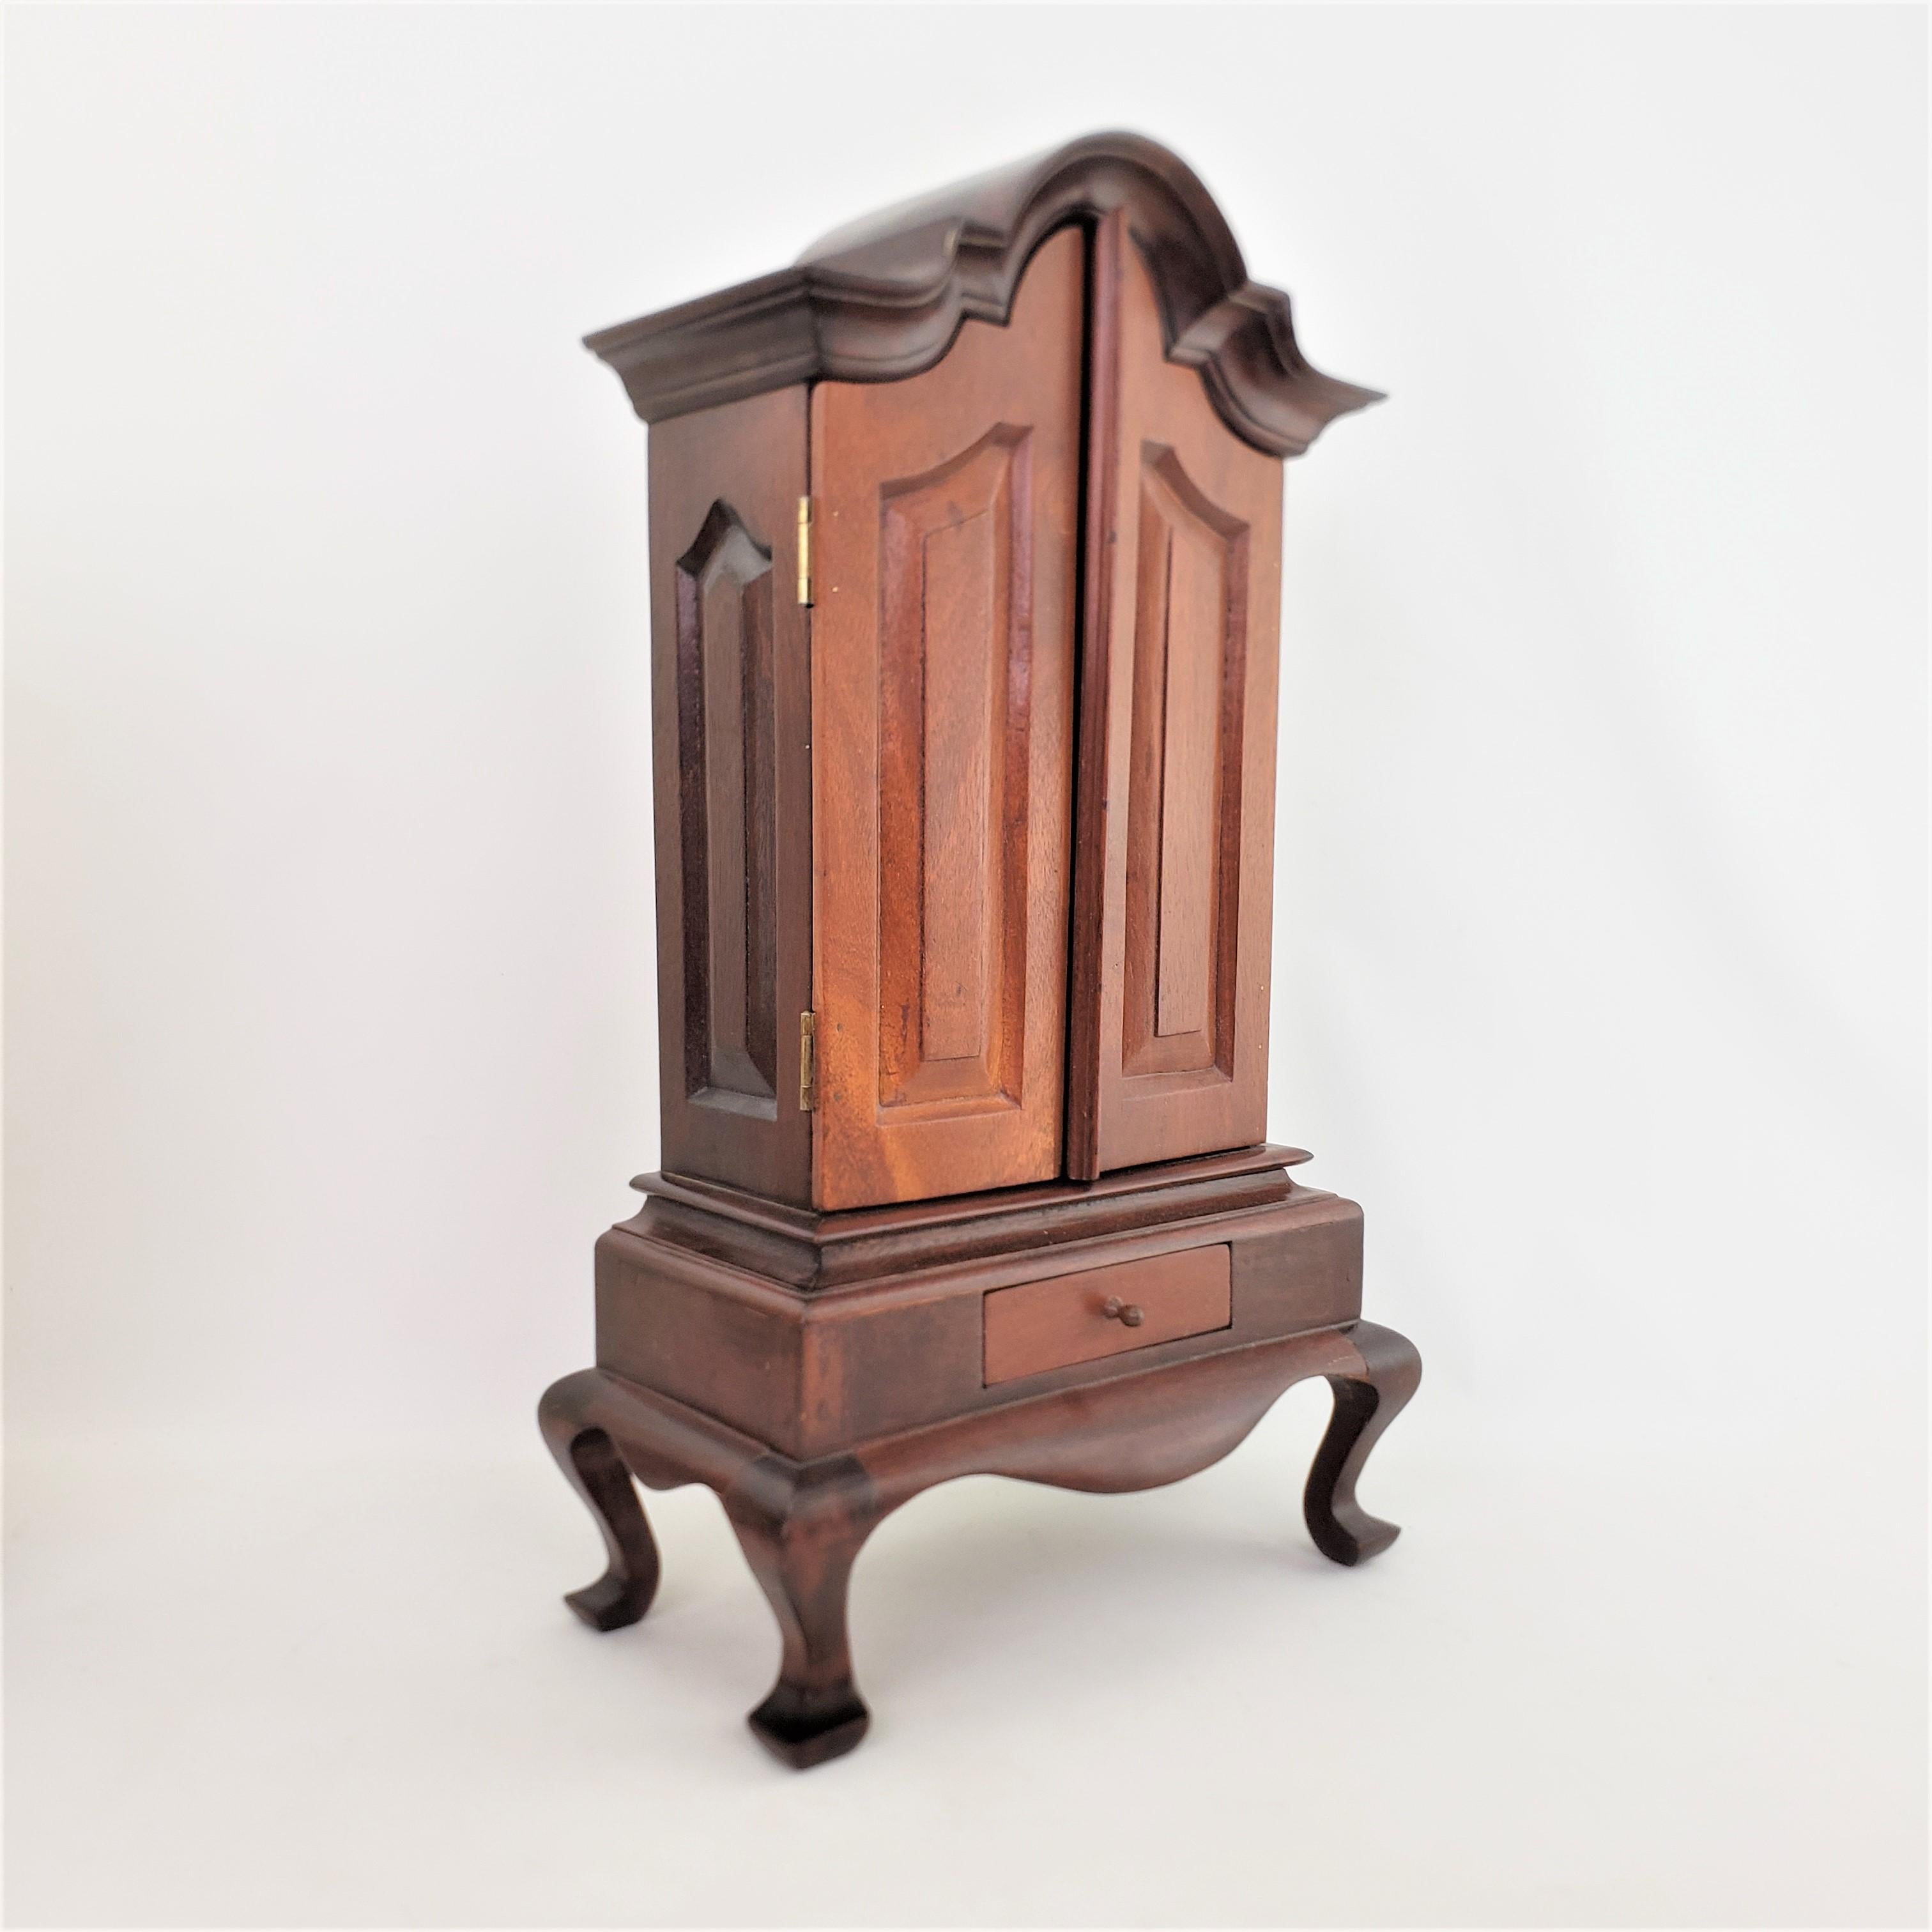 Hand-Crafted Miniature Mid-Century Era Wooden Queen Anne Styled Vanity Cabinet or Cuphoard  For Sale